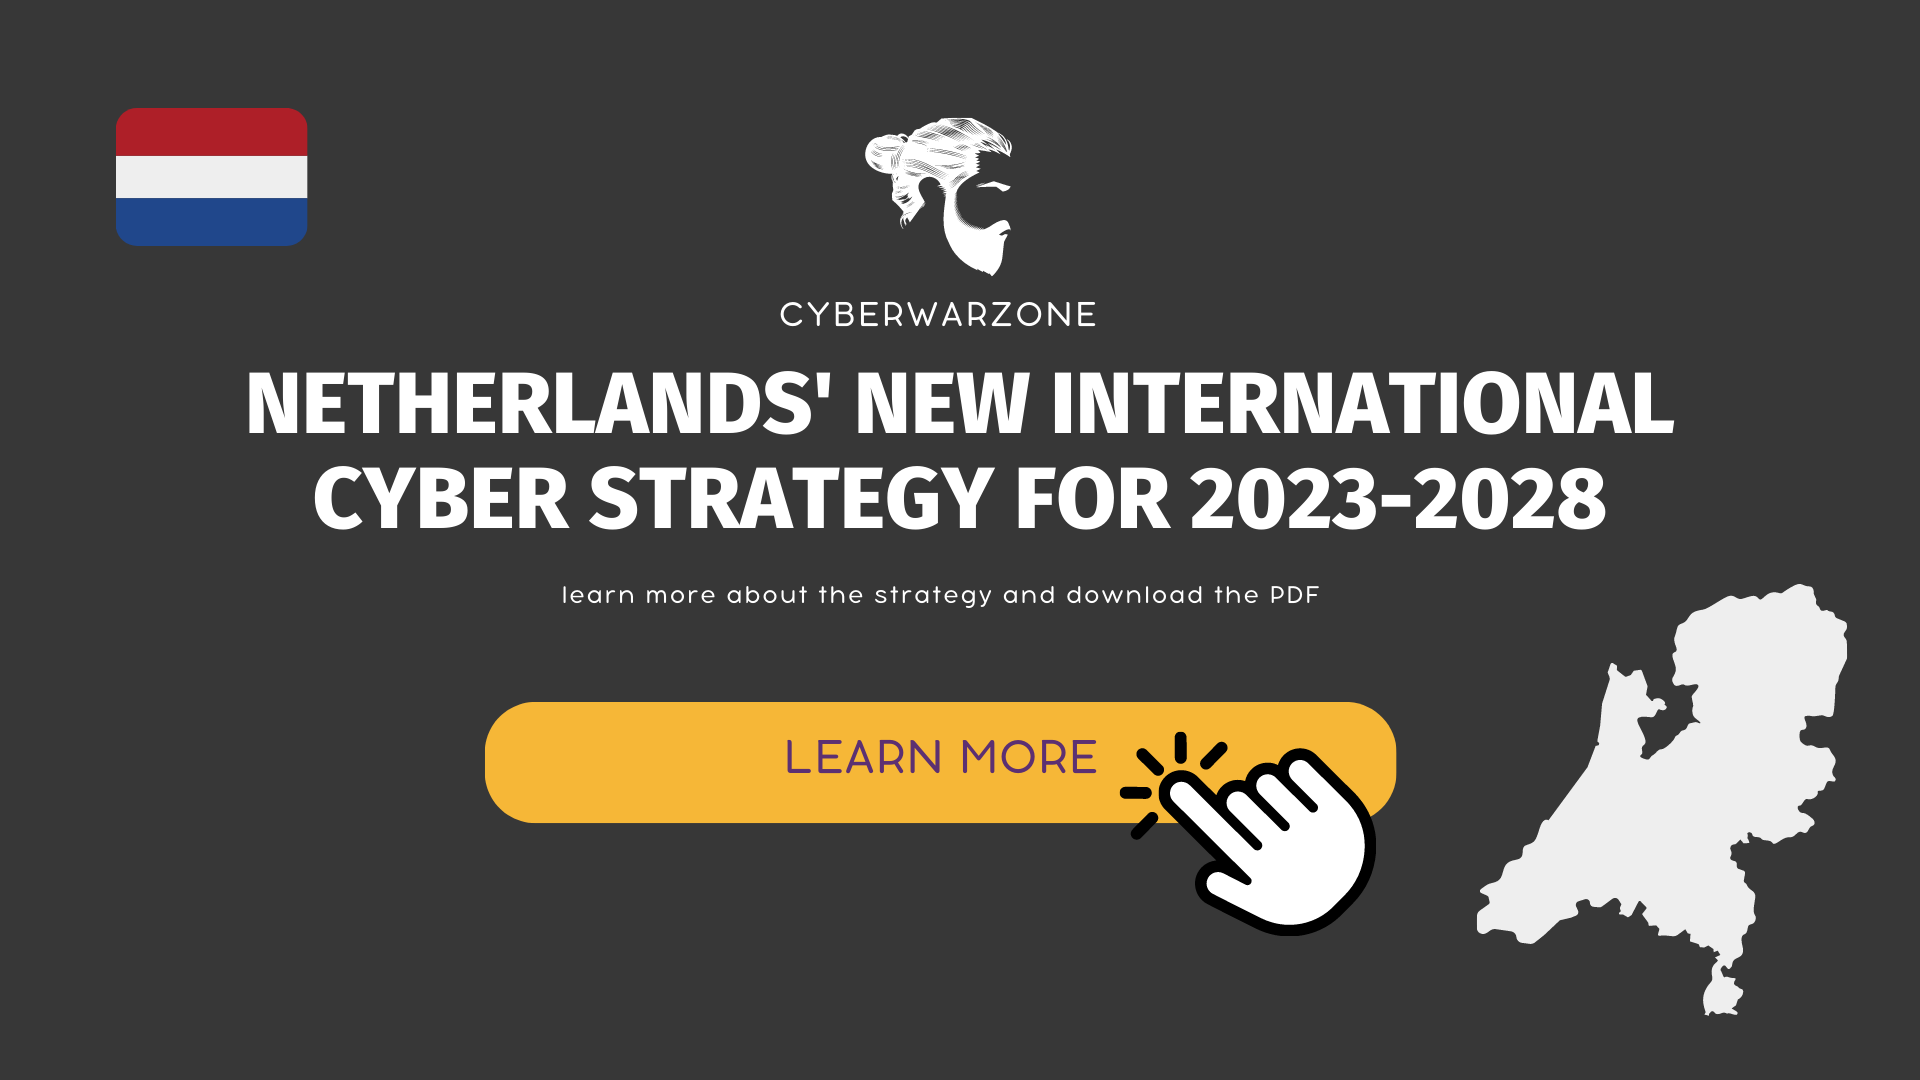 Netherlands' New International Cyber Strategy for 2023-2028